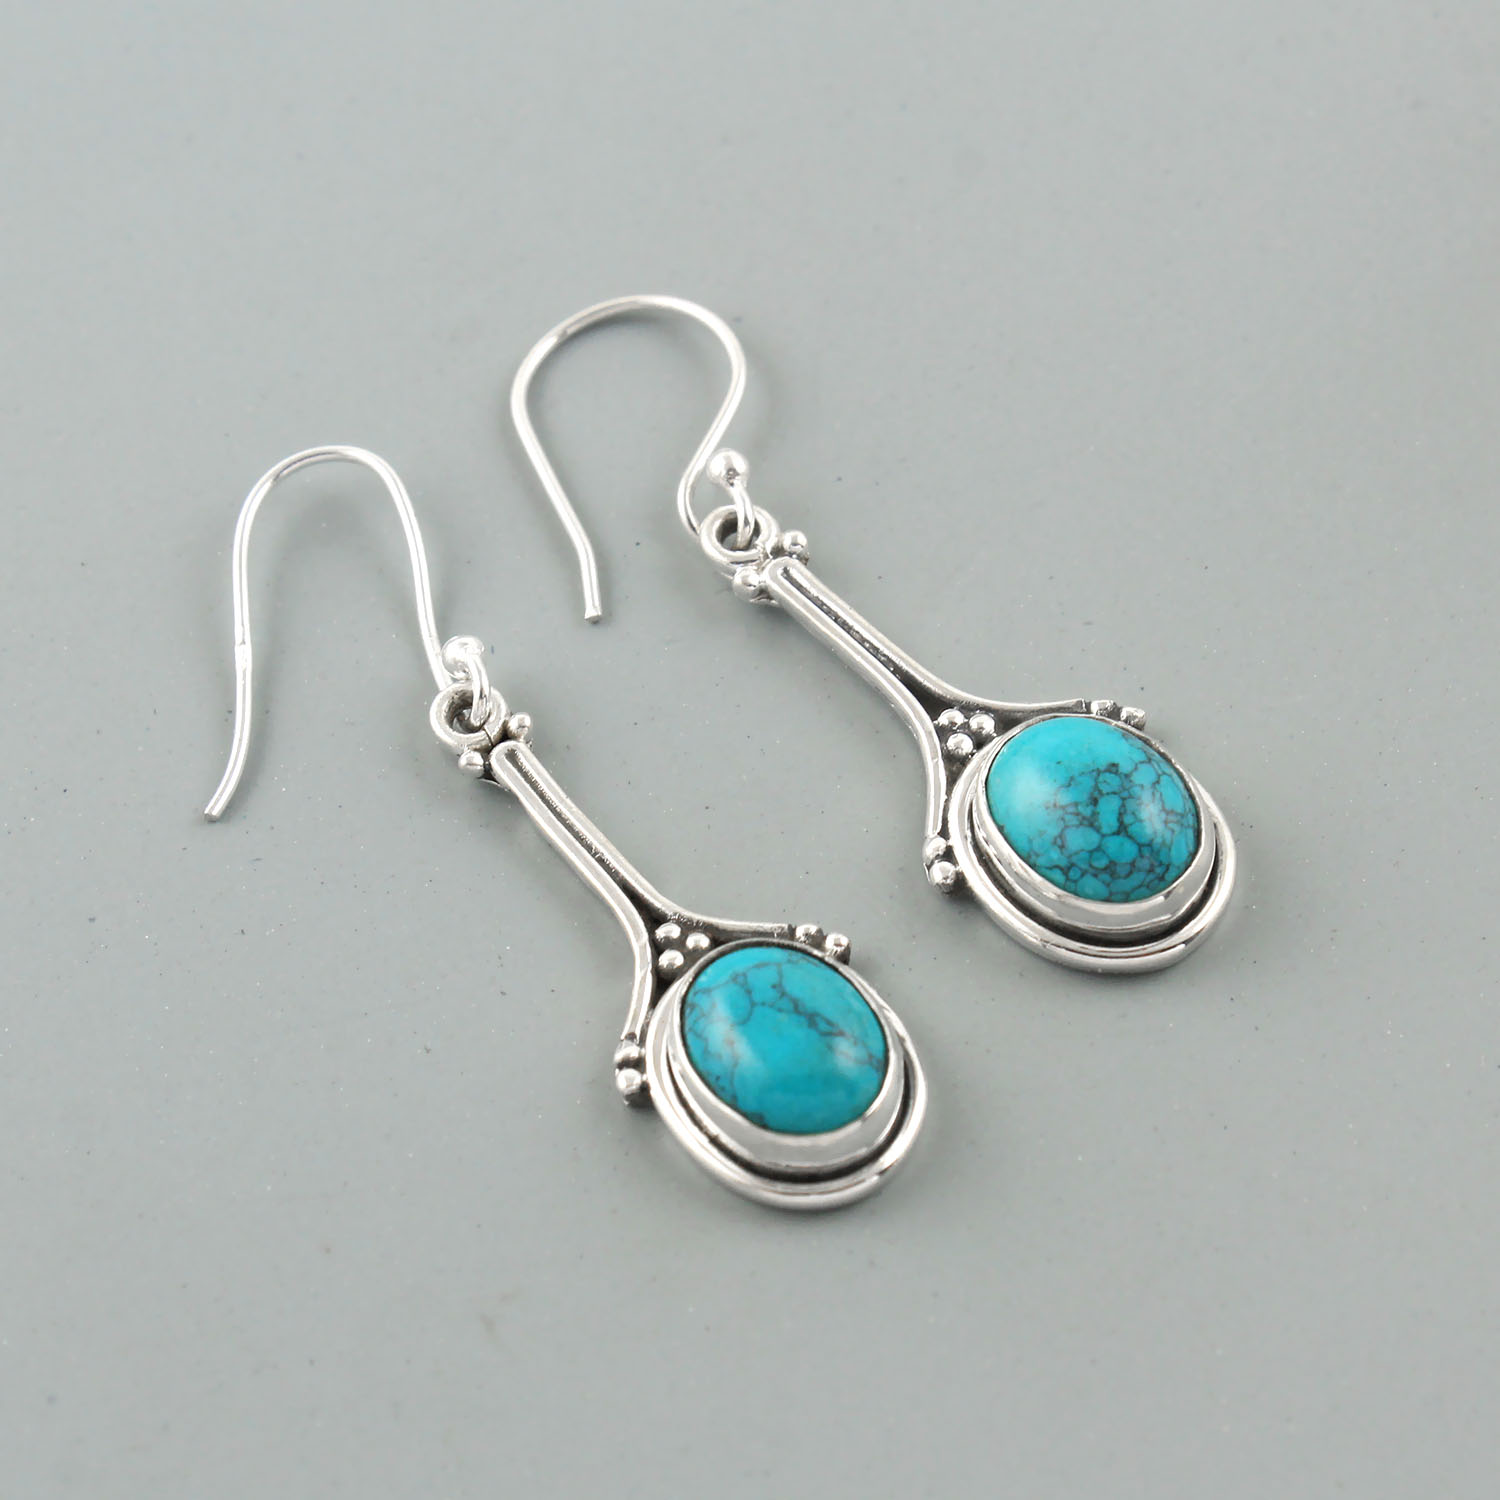 Wholesale Turquoise jewelry Suppliers | Turquoise Gemstone Jewelry ...